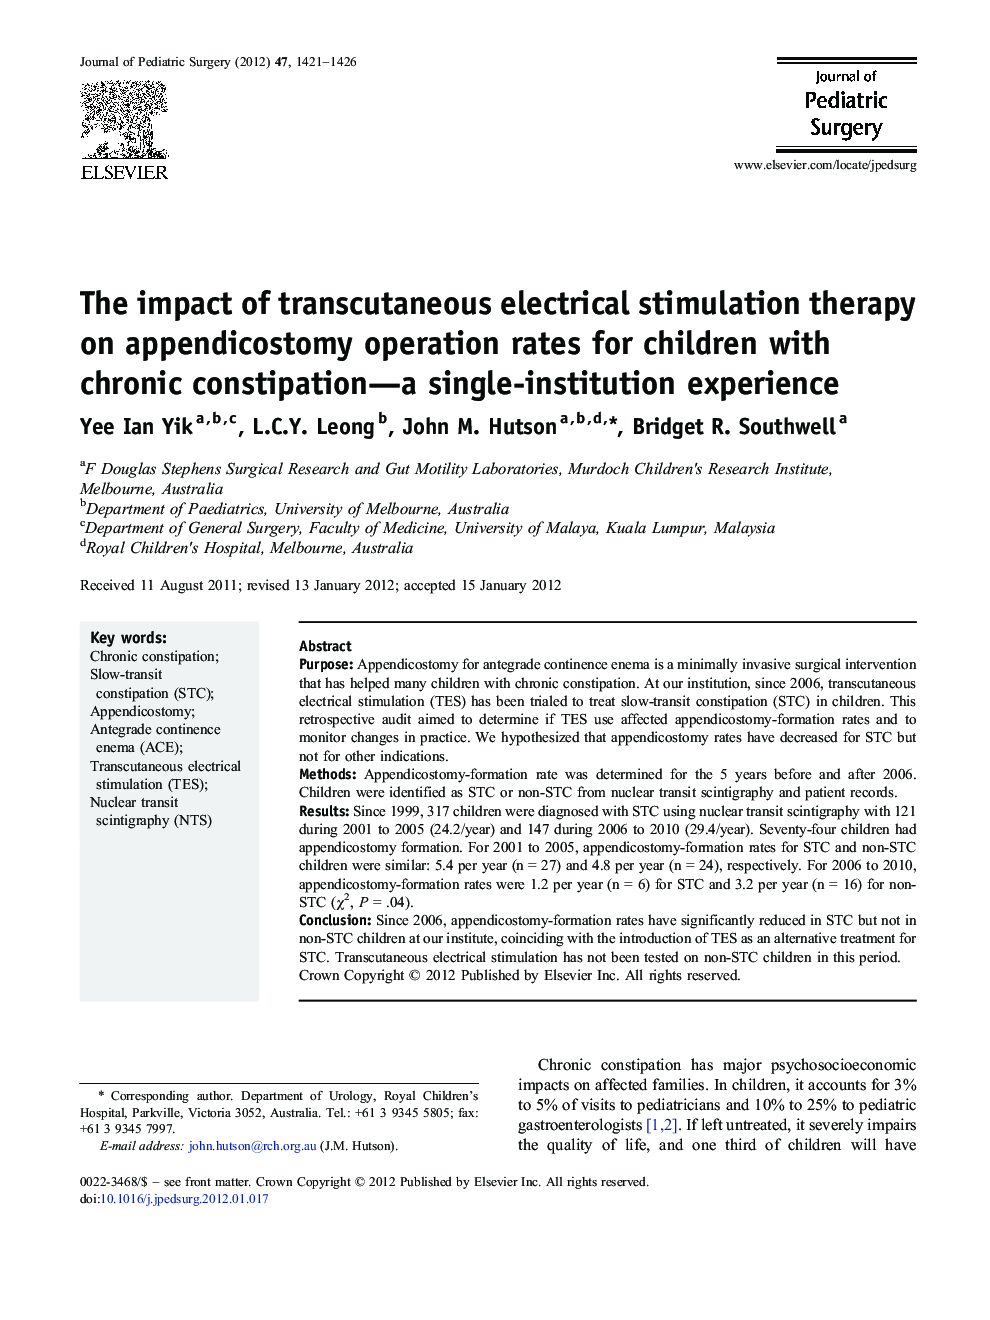 The impact of transcutaneous electrical stimulation therapy on appendicostomy operation rates for children with chronic constipation—a single-institution experience